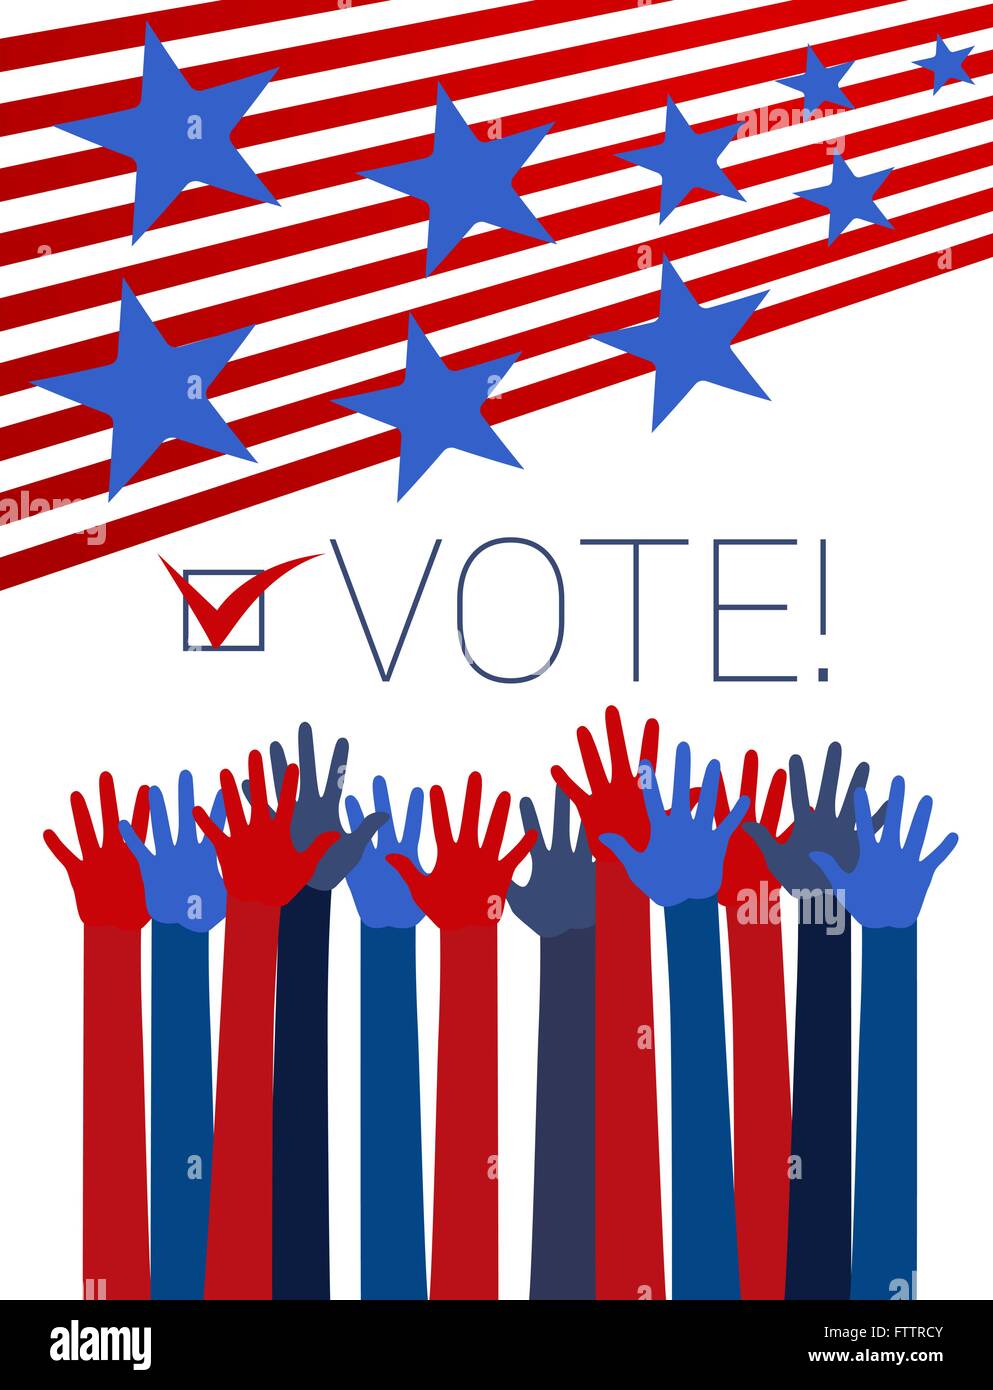 Vote conceptual illustration with raising hands, red stripes and blue stars. Vector Stock Vector